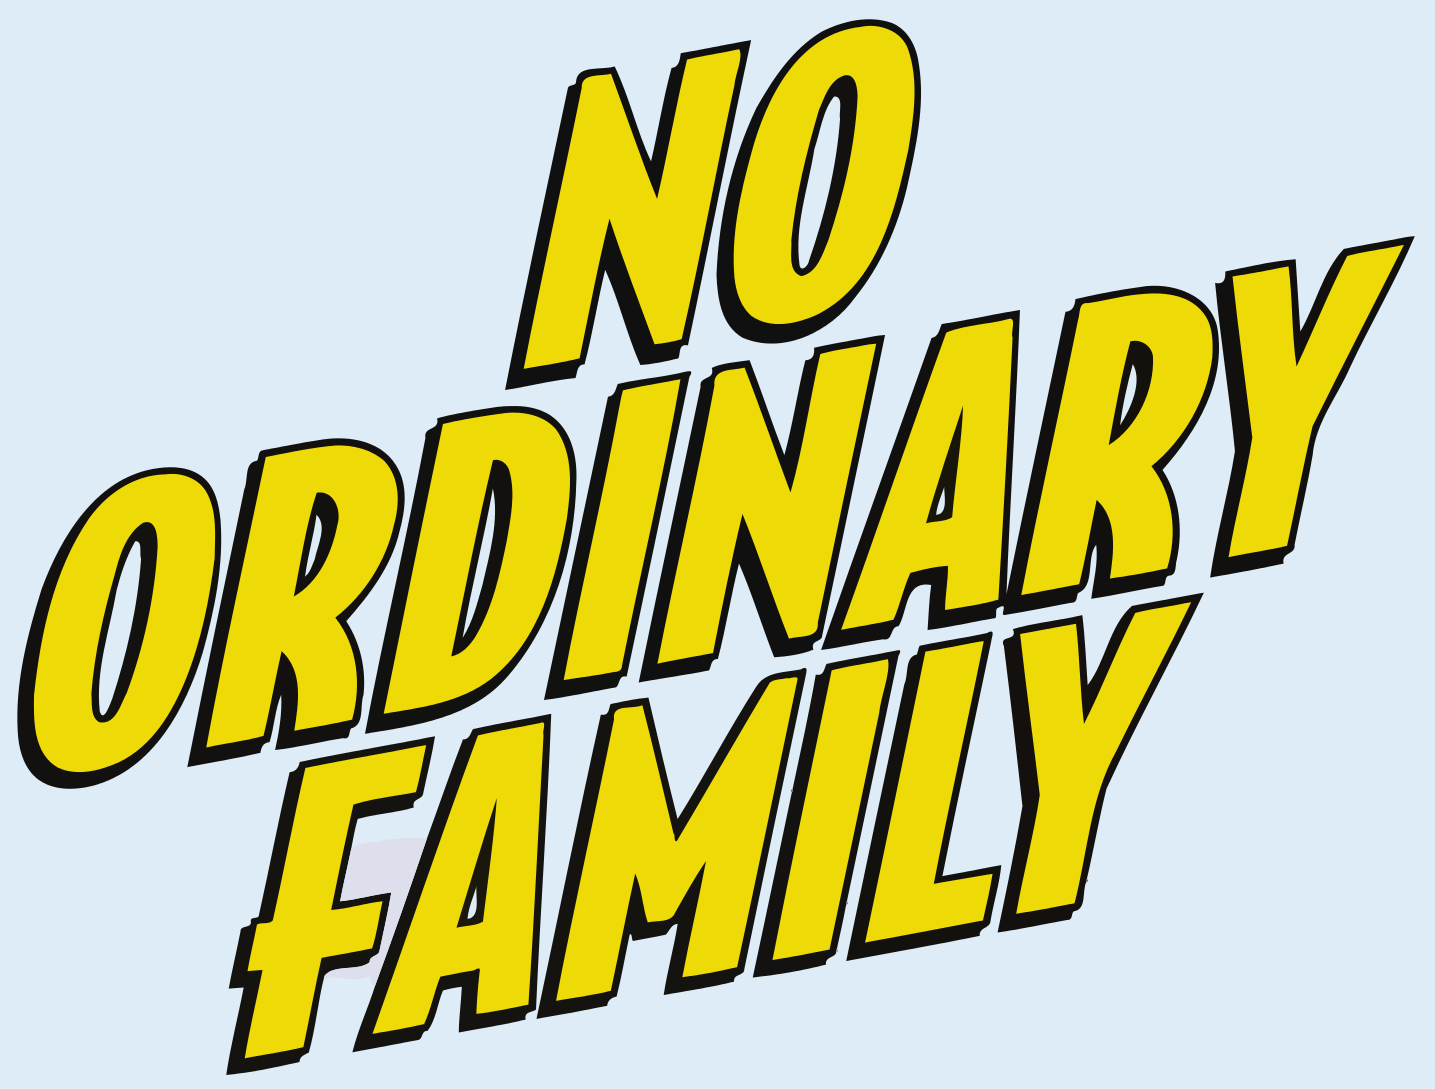 Download File:No Ordinary Family Logo.svg - Wikimedia Commons